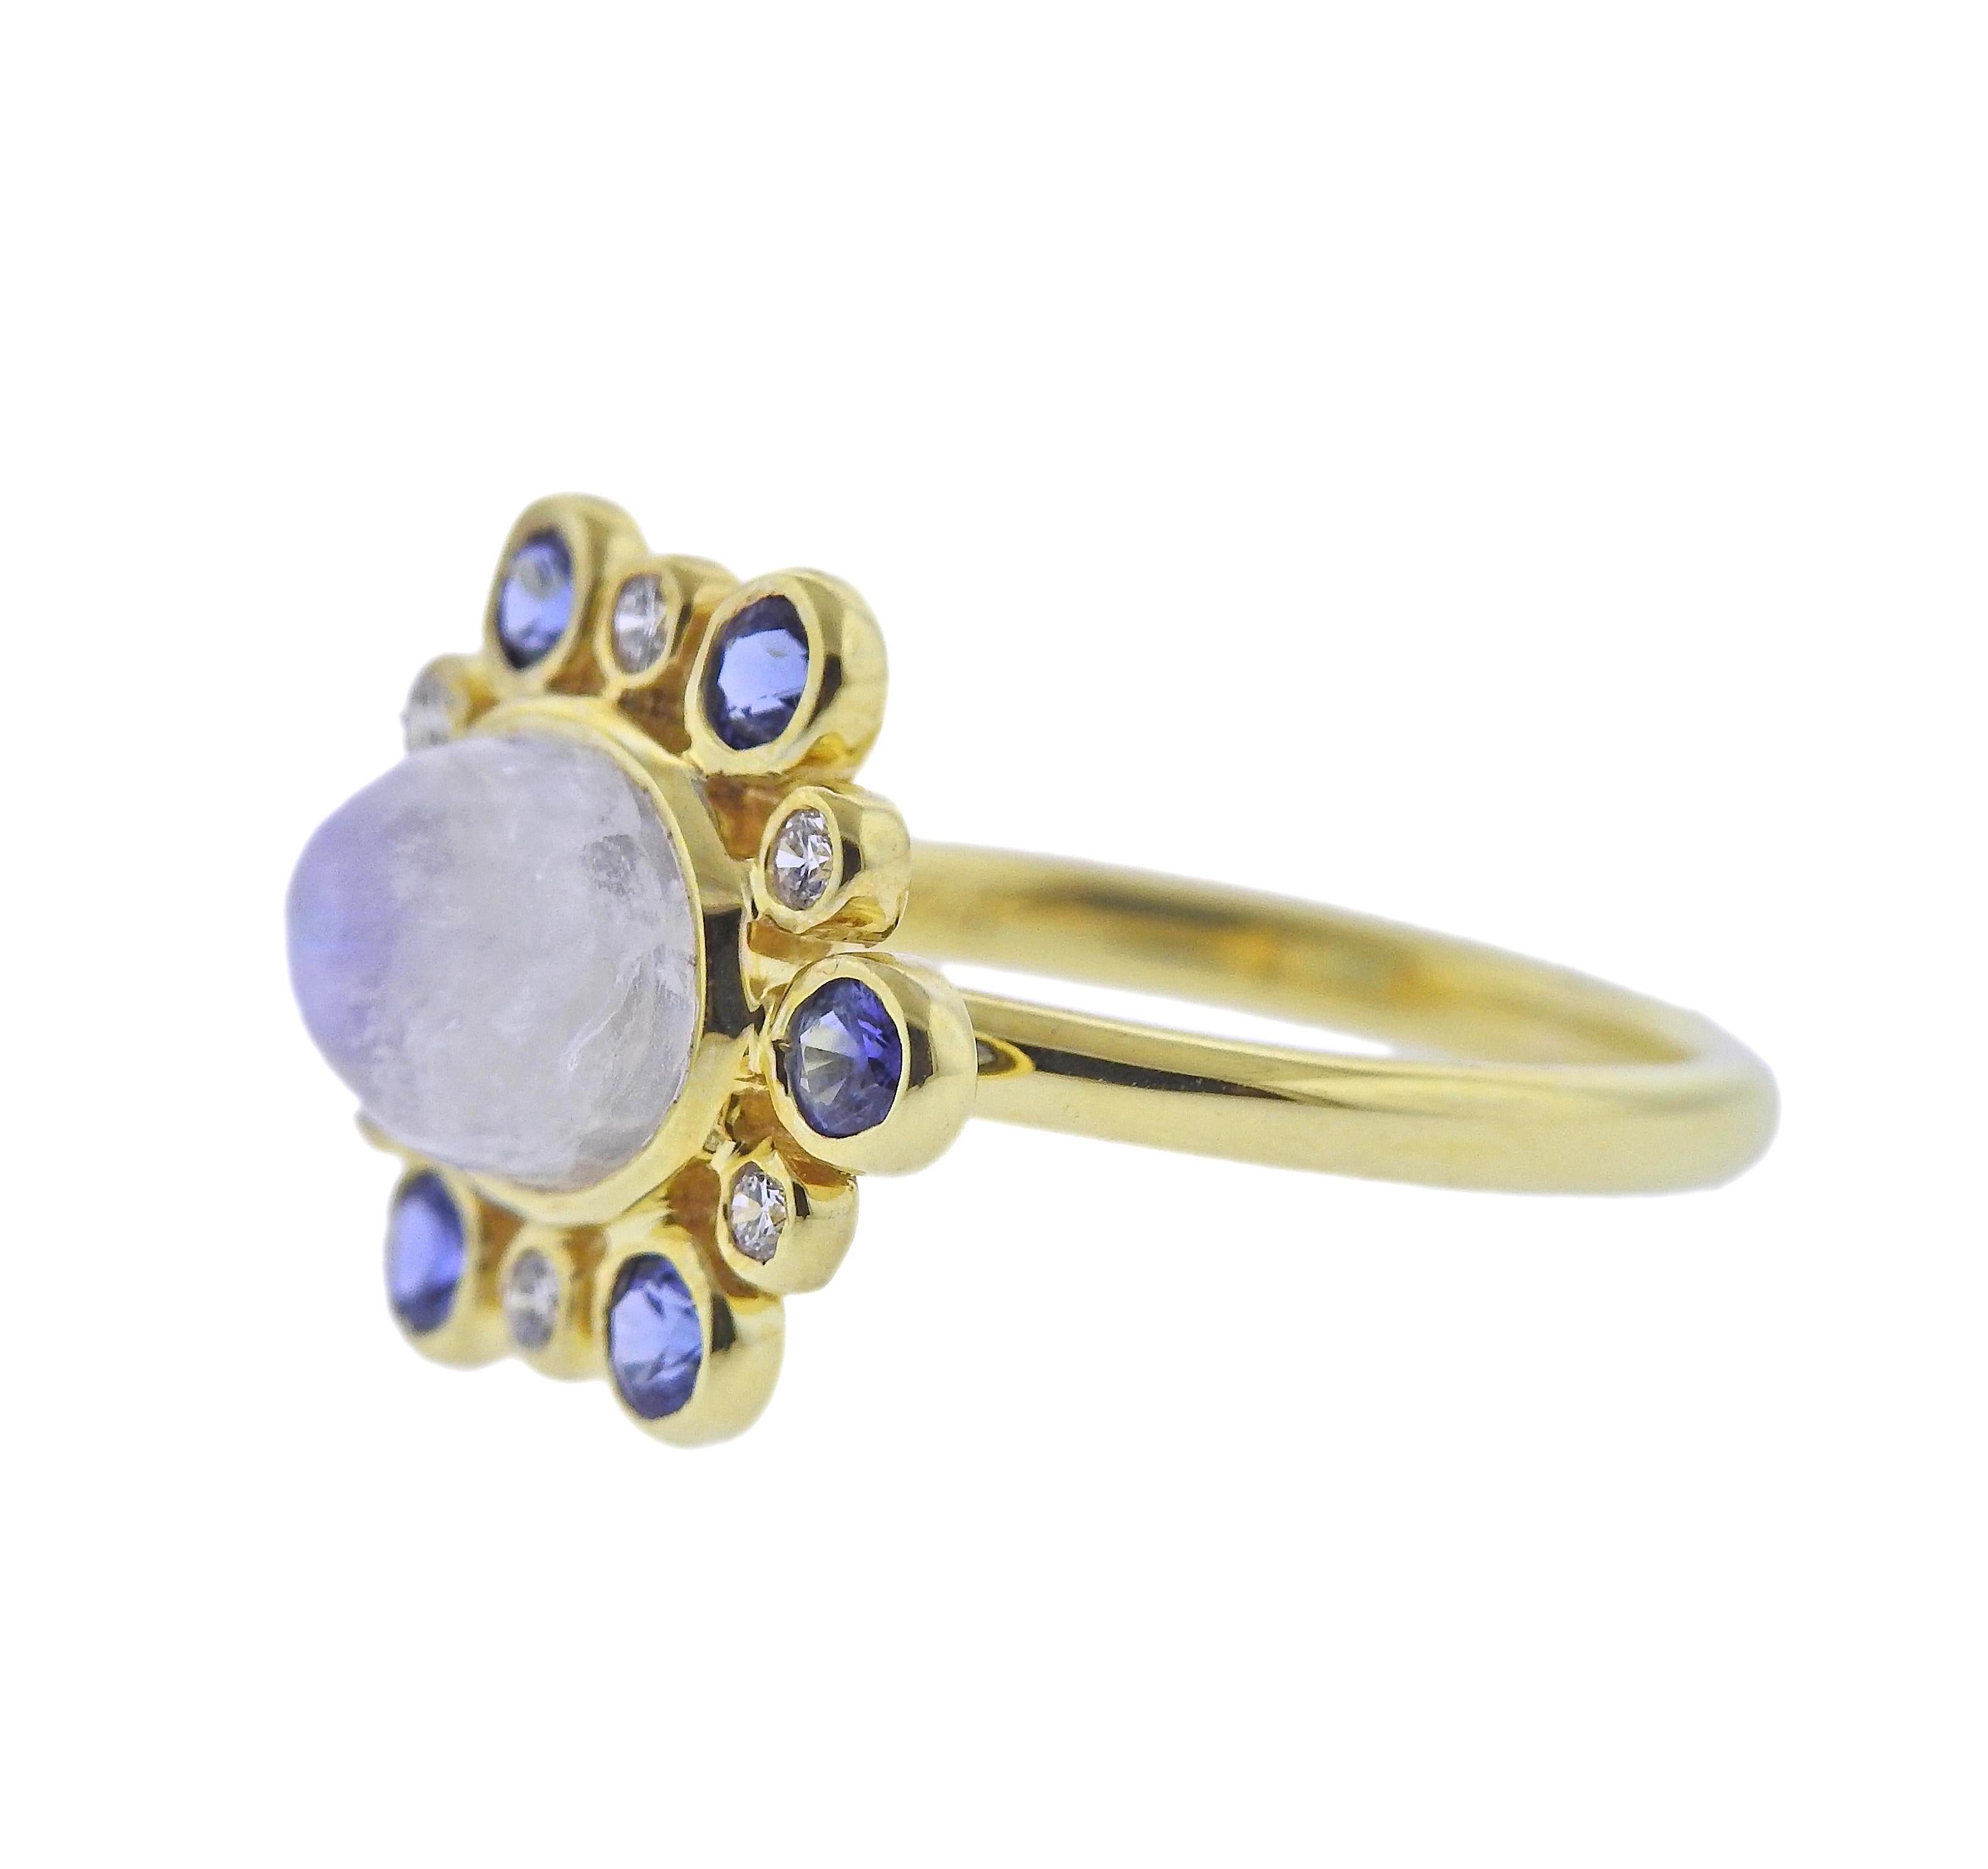 Brand new 14k gold Maz ring, with 0.12ctw H/VS diamonds, Moonstone and sapphires. Ring size 7, top is 15mm x 18mm. Weight - 3.7 grams. Marked: MAZ, 14k.